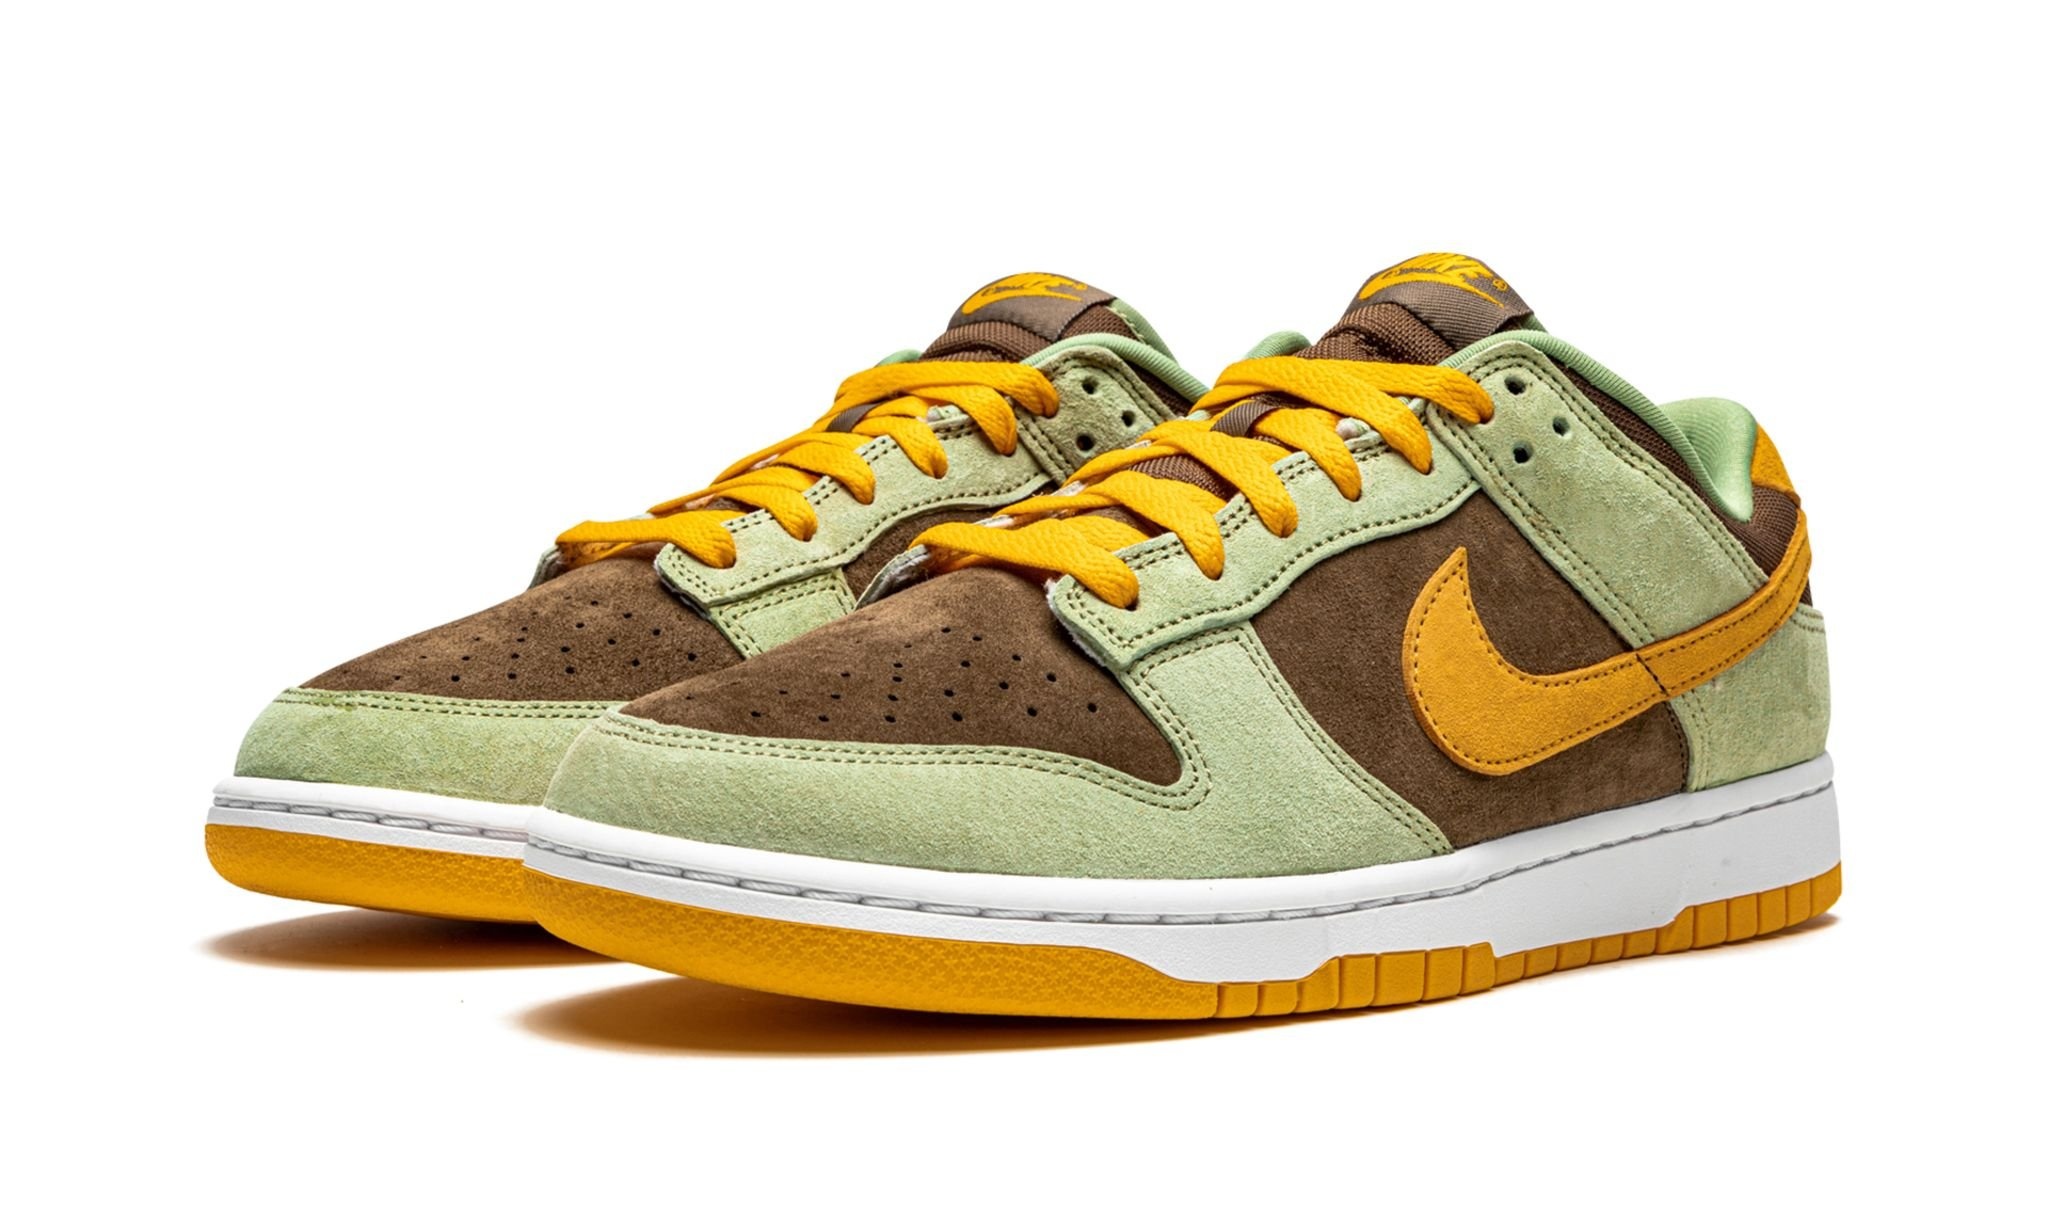 Dunk Low "Dusty Olive" - 2